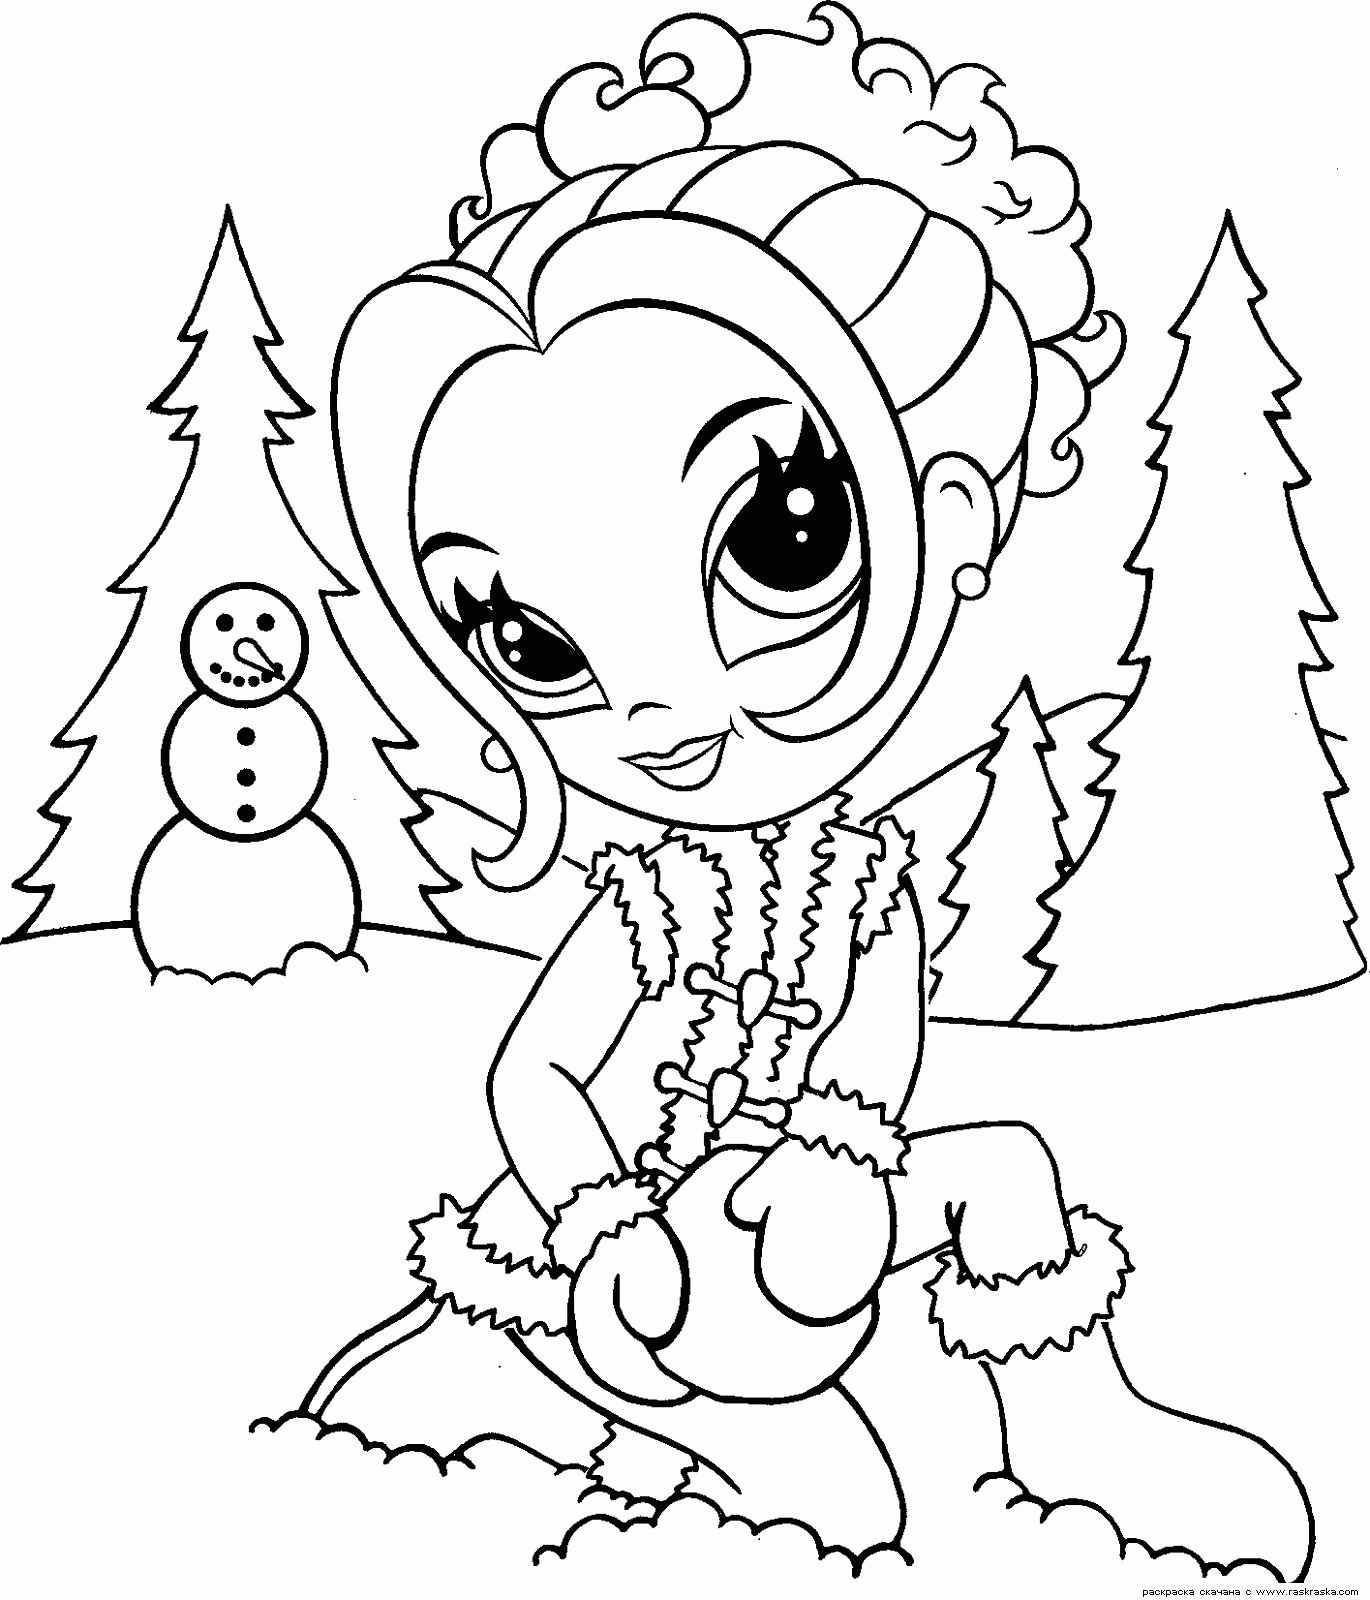 Lisa Frank makes a snowman Coloring Page